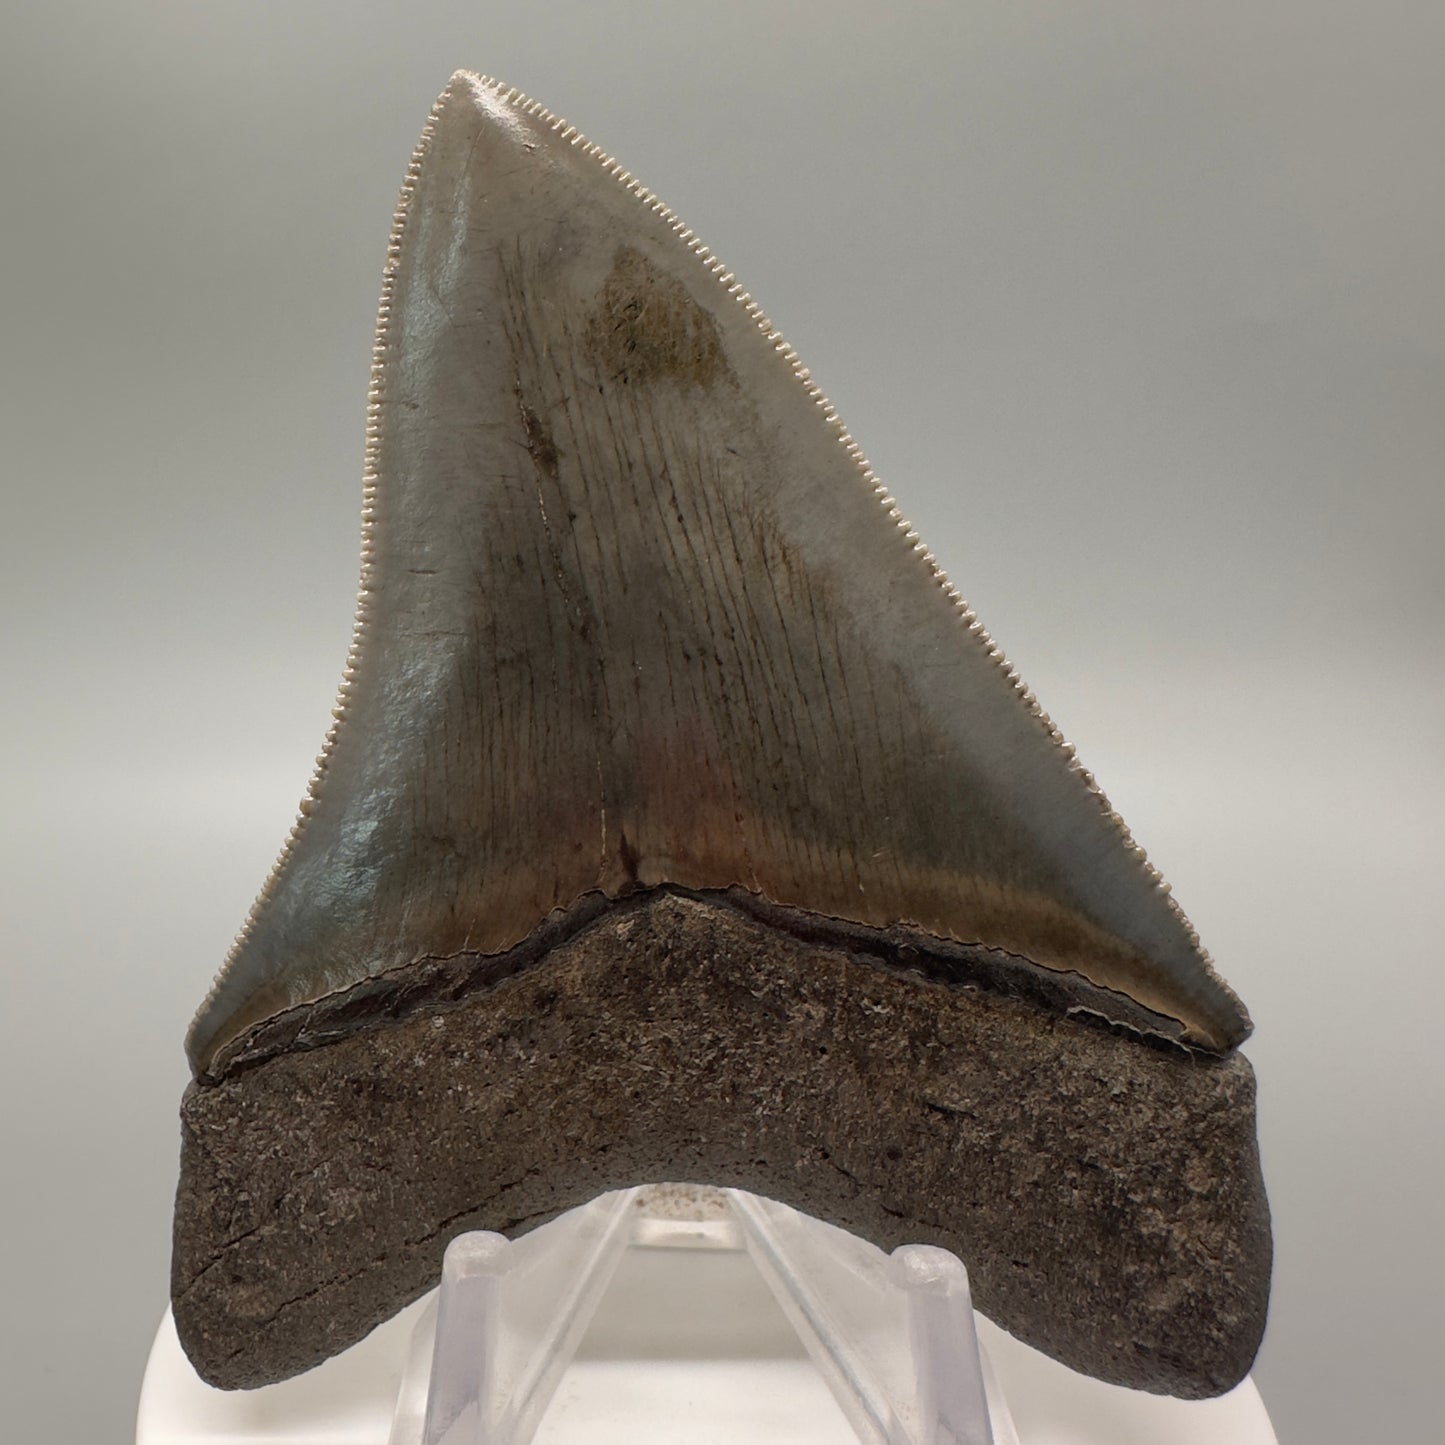 Sharply serrated 3.41" Fossil Megalodon Tooth: Scuba Diving Discovery from Georgia CM4609 - Back